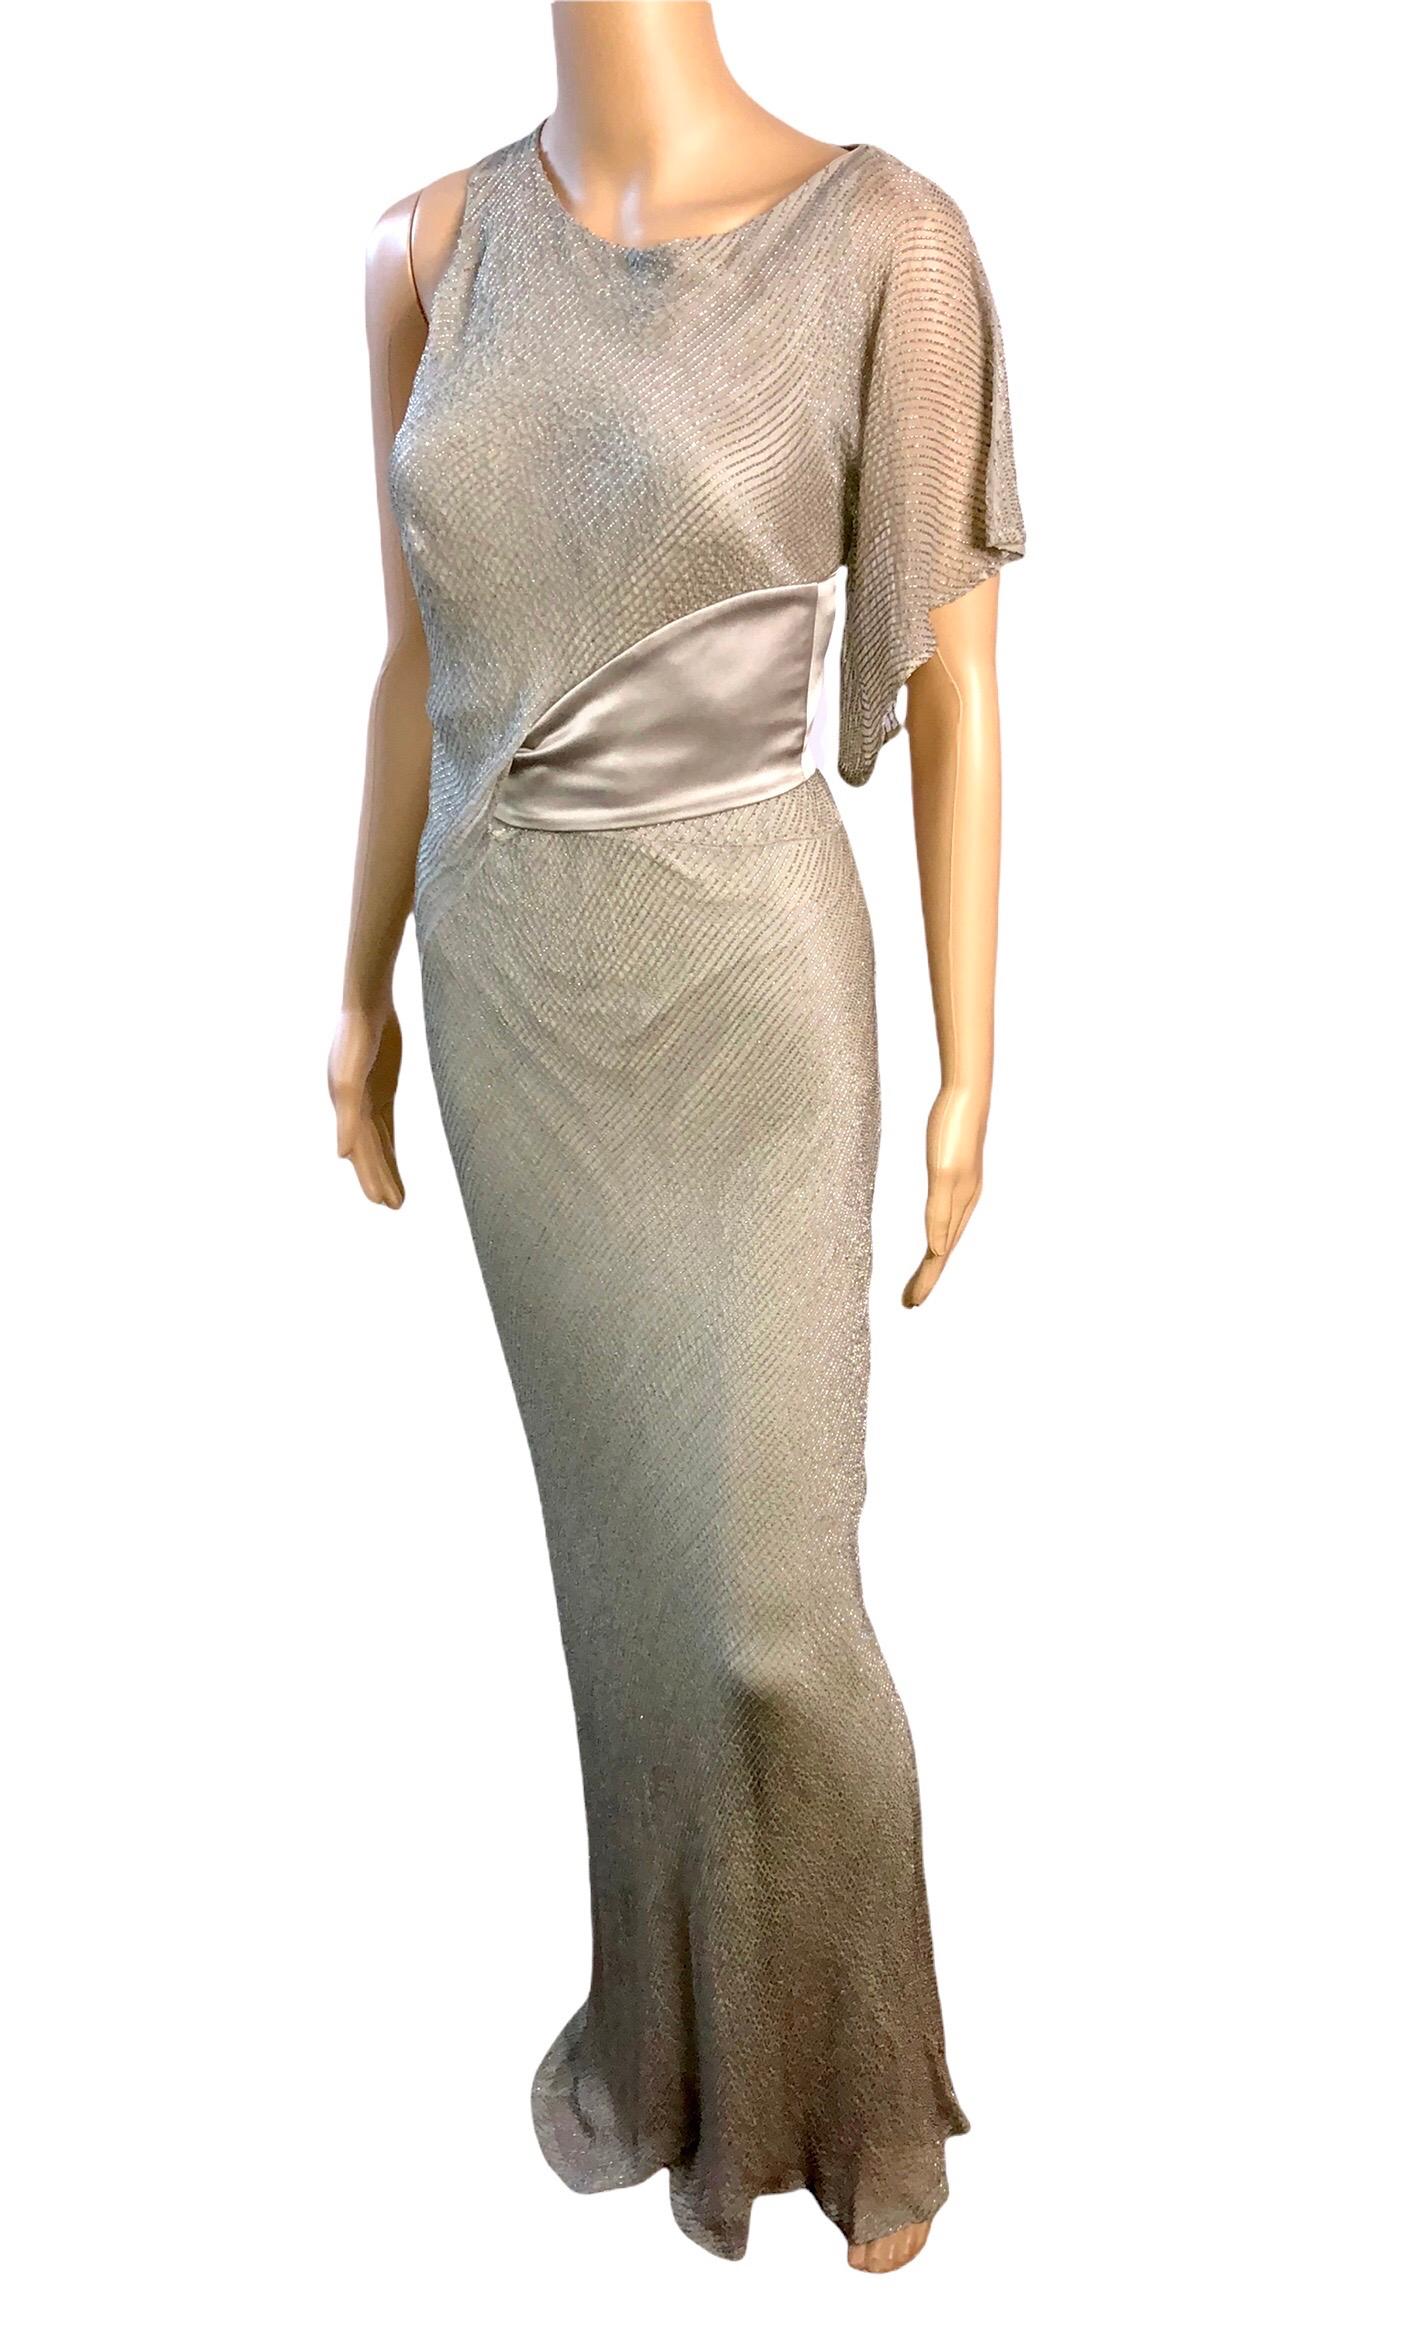 Versace F/W 2009 Runway Embellished Cutout Belted Silk Evening Dress Gown  2